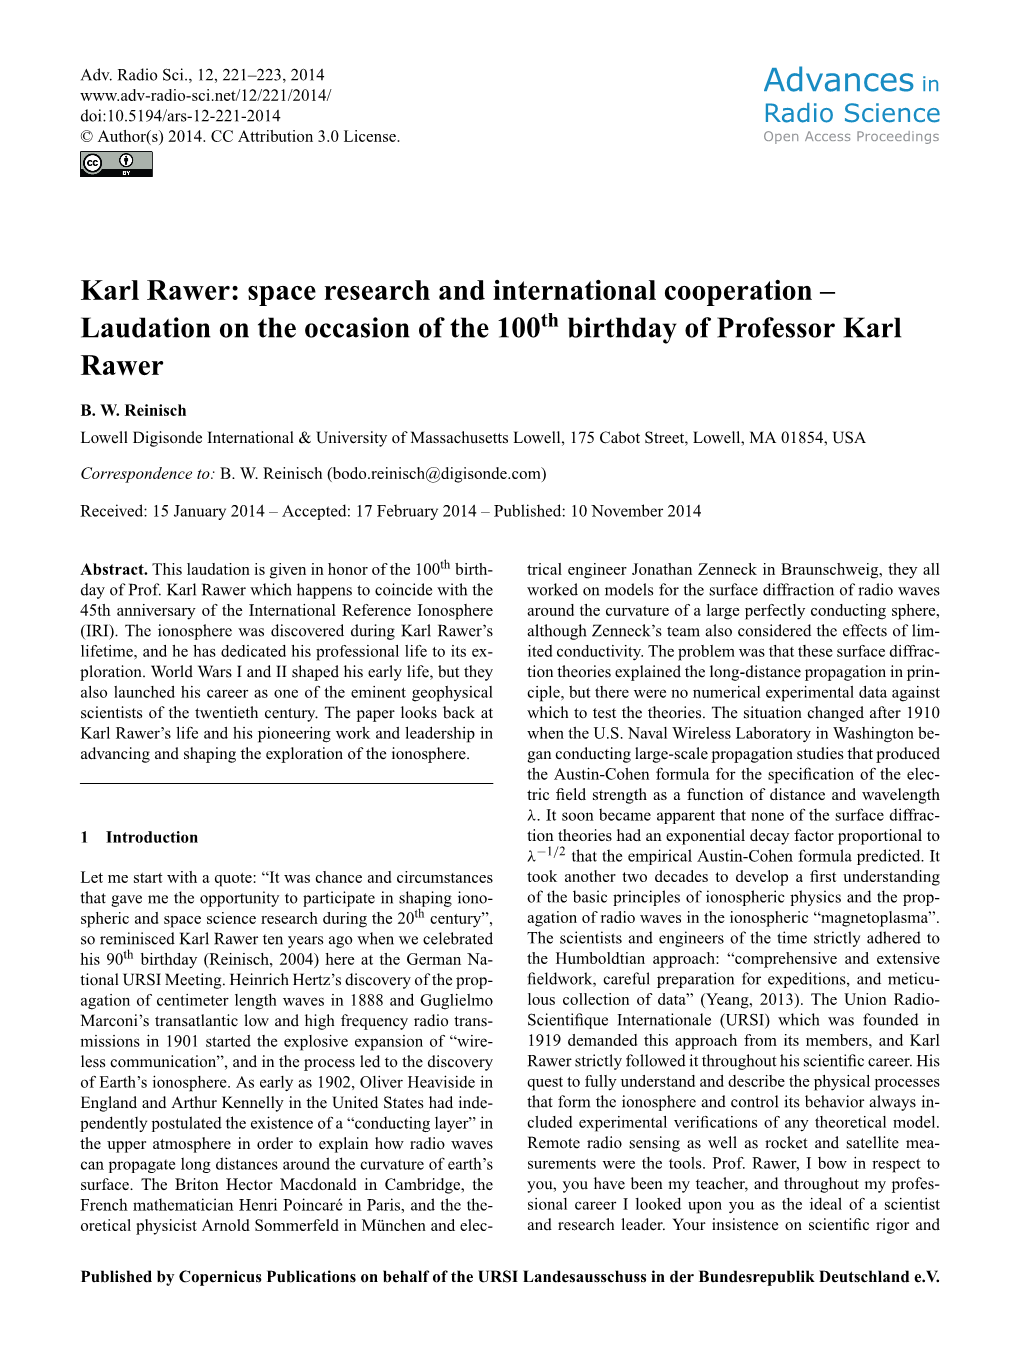 Karl Rawer: Space Research and International Cooperation – Laudation on the Occasion of the 100Th Birthday of Professor Karl Rawer